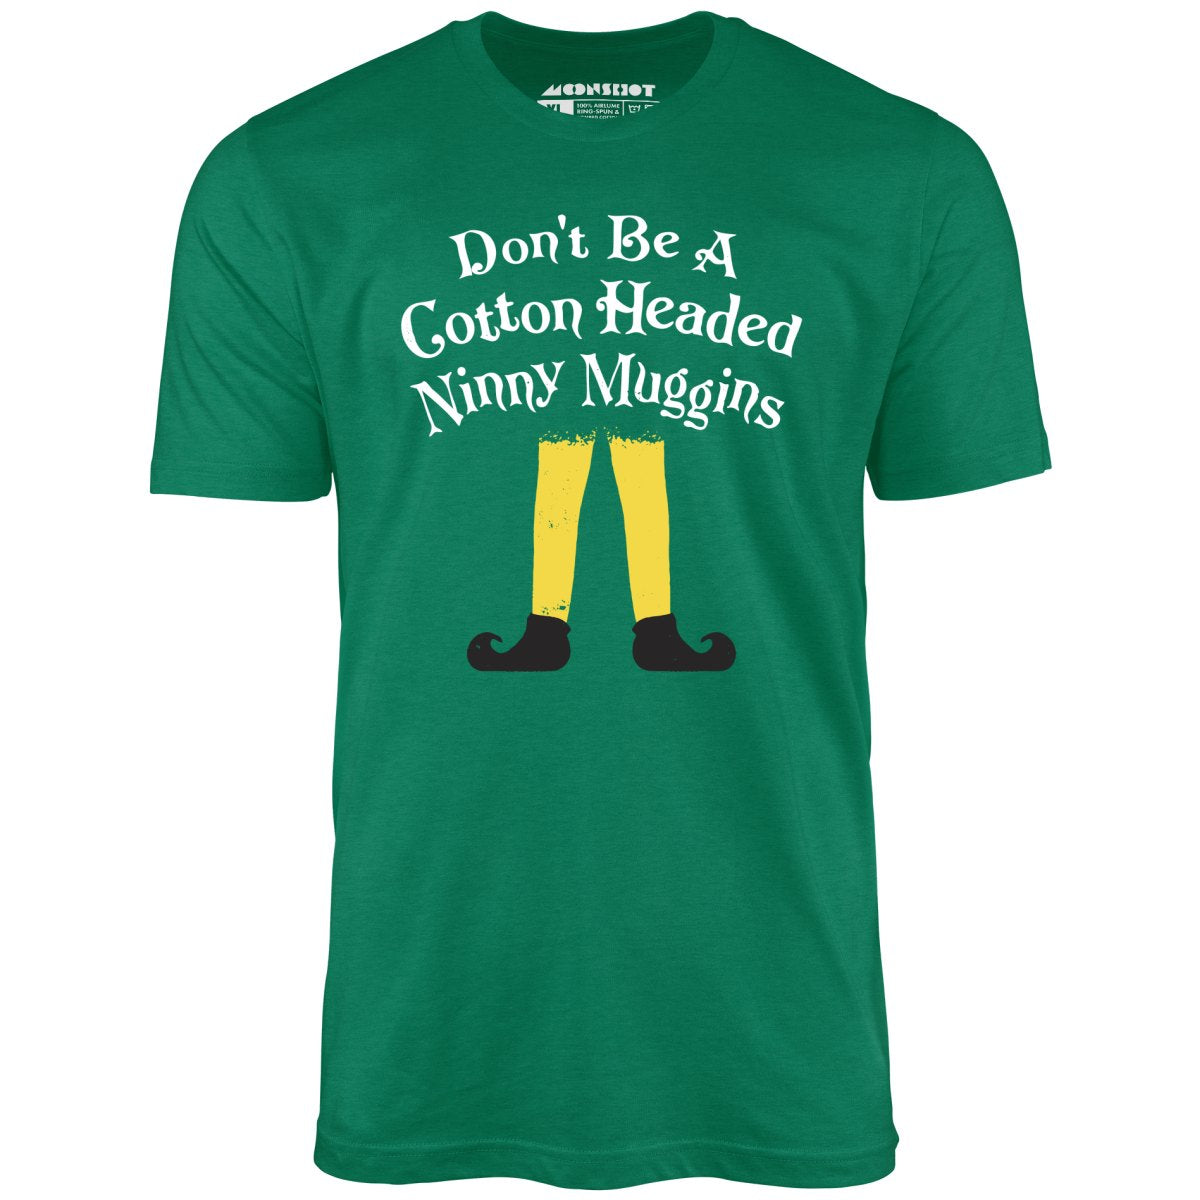 Don't Be a Cotton Headed Ninny Muggins - Unisex T-Shirt